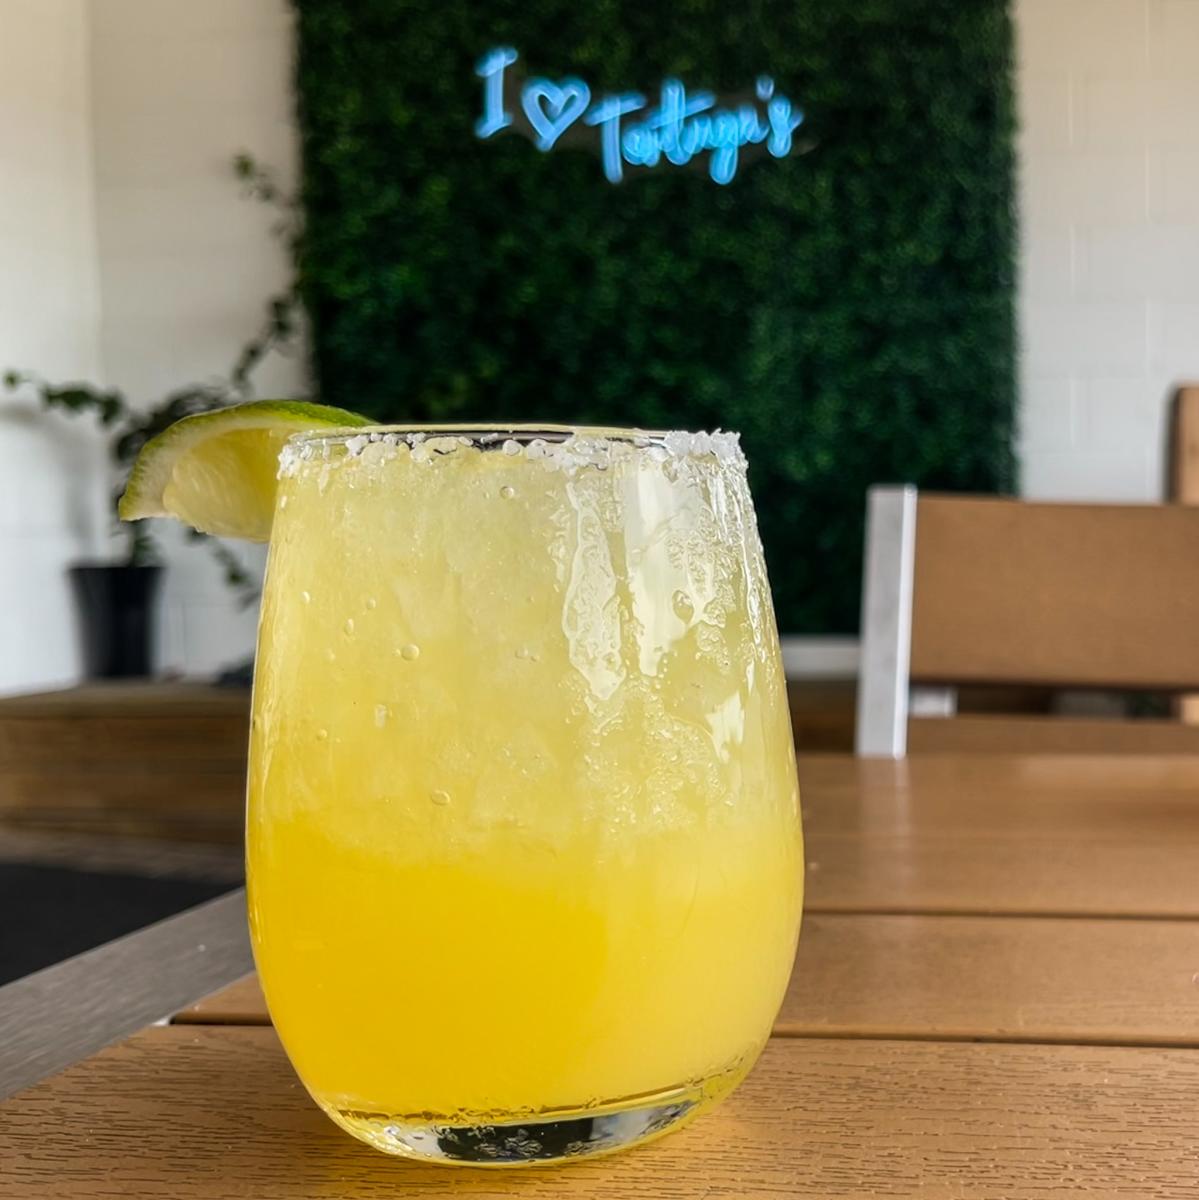 A yellow margarita in a stemless glass sits on a table. In the background is a greenery wall with a neon sign that says "I <3 Tortuga's"